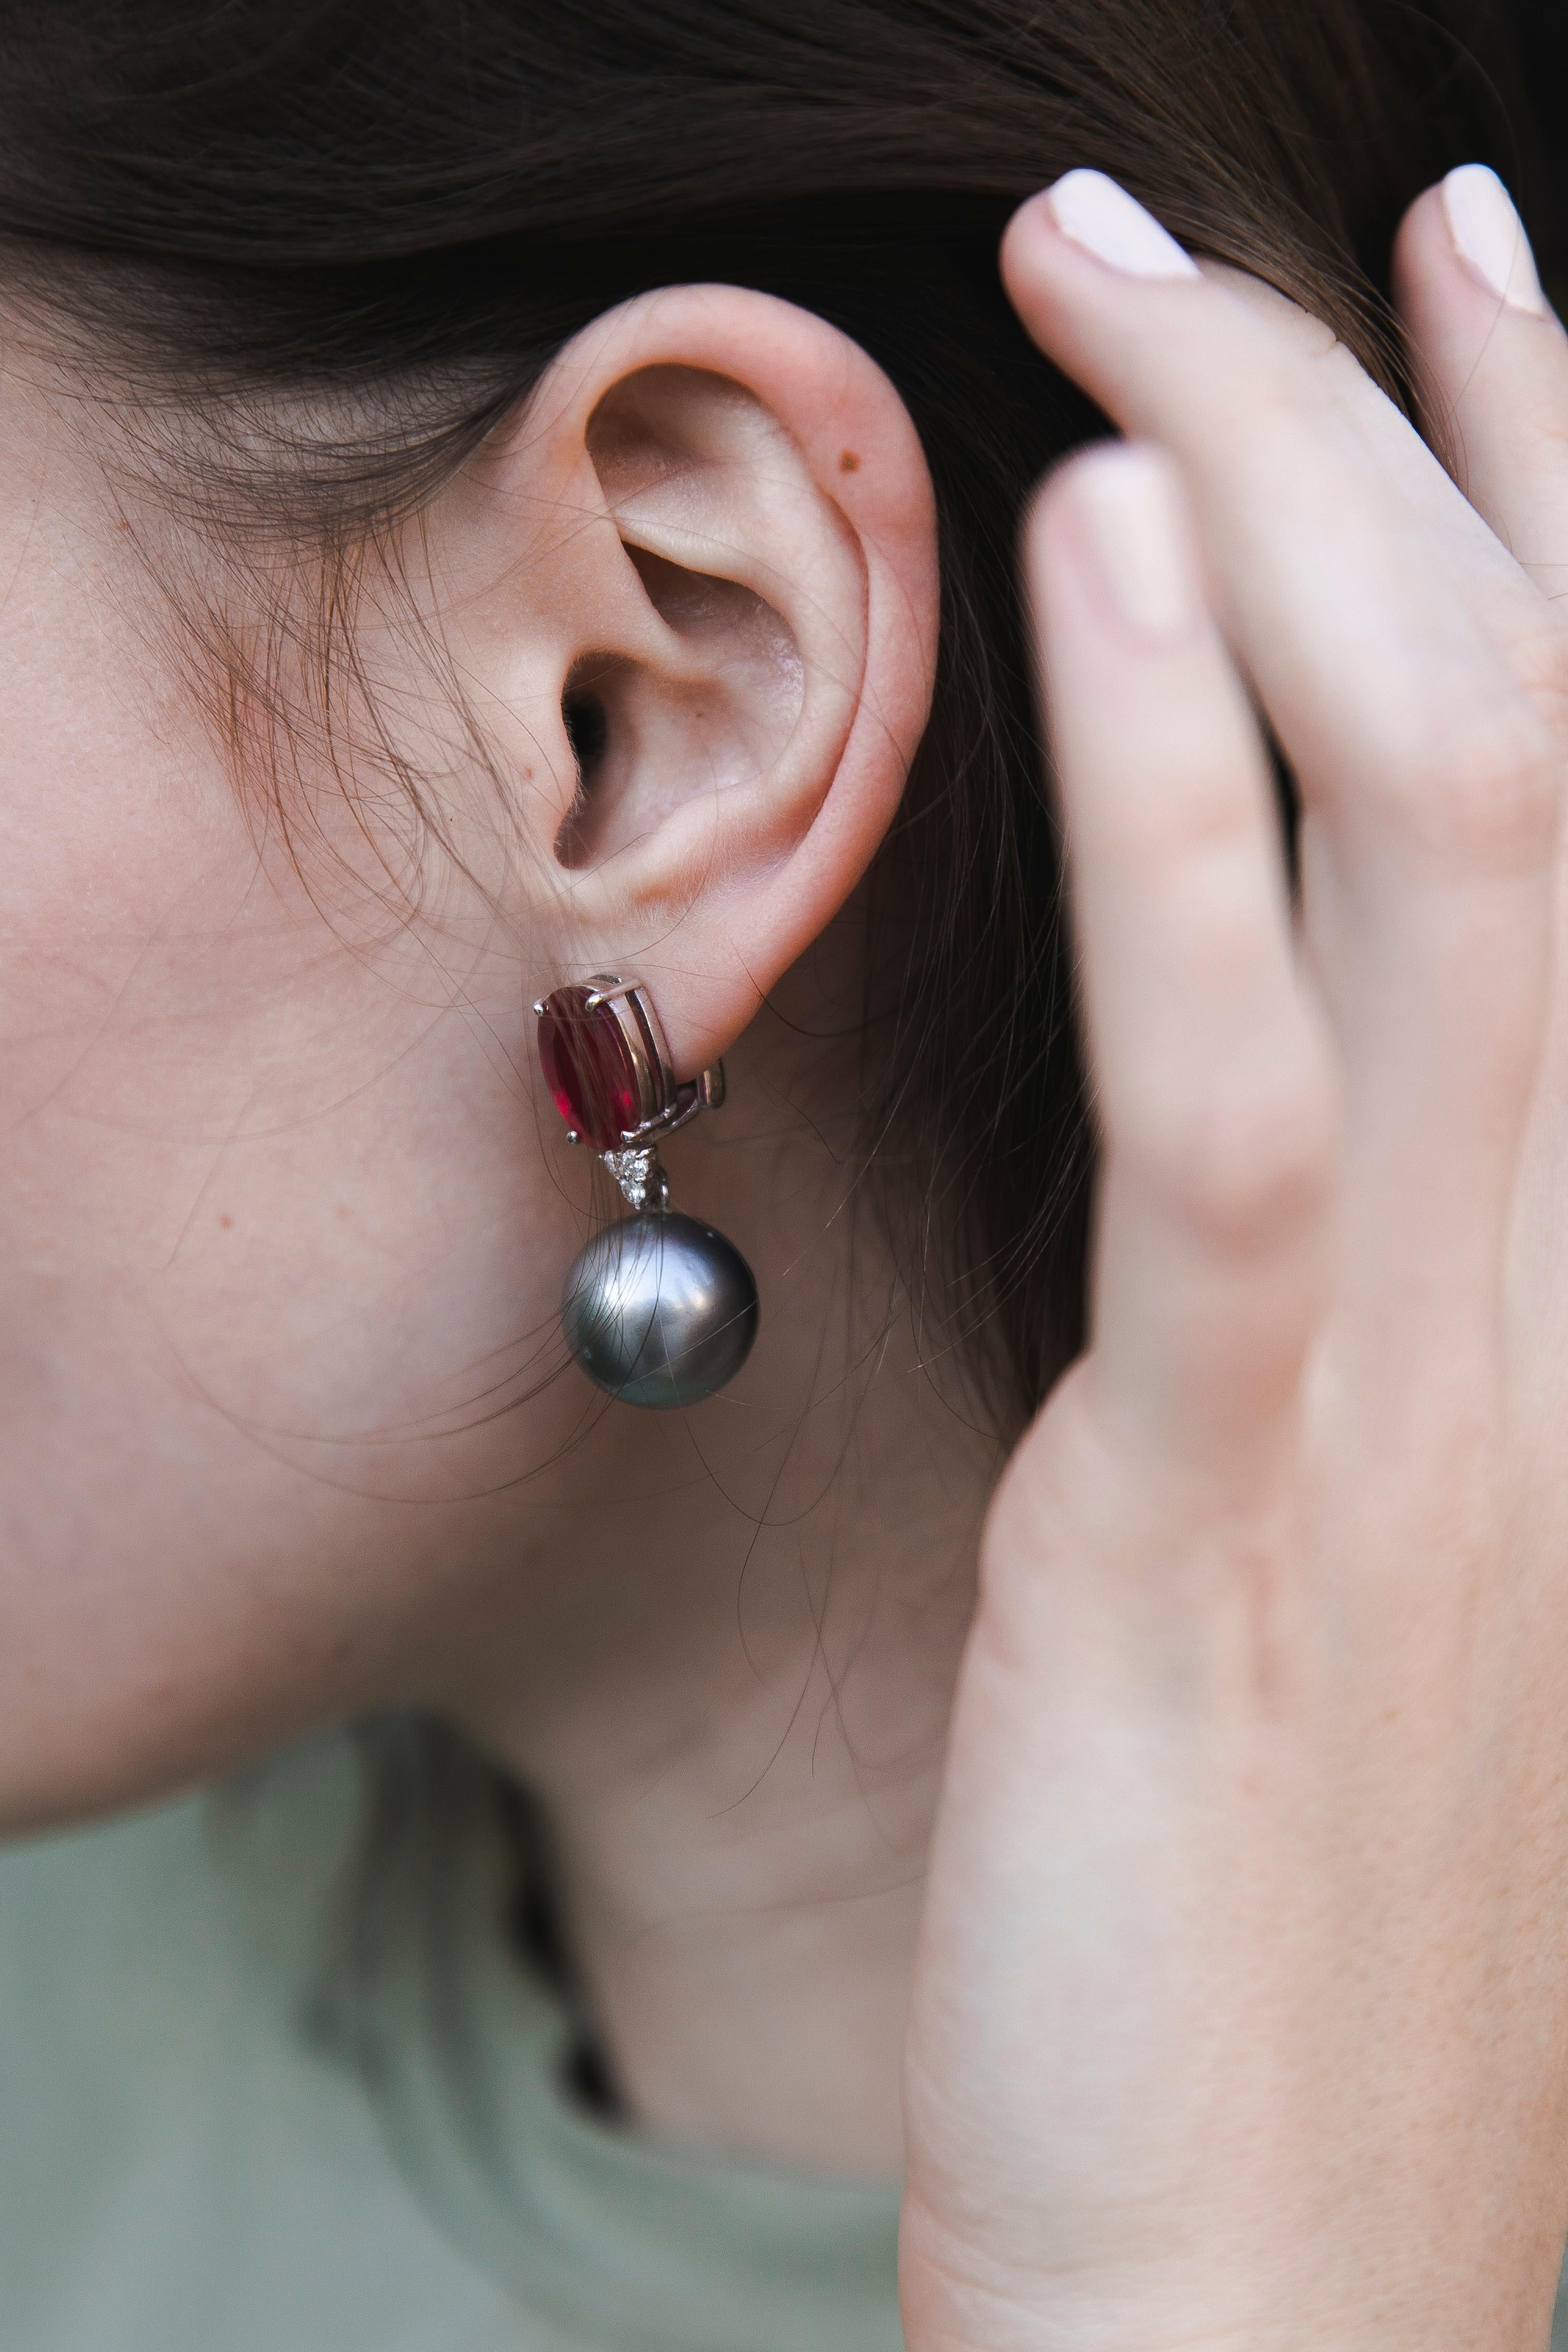 Pearl Ruby and Diamonds  Earrings. Pearl of Tahitian origin. Dark Grey colour and perfect Luster.
Diameter: 15.8 mm (0.62 inch)
Amazing colour combination of blood-red Rubies held by a White Gold and three round-cut Diamonds and Fine grey Pearls.